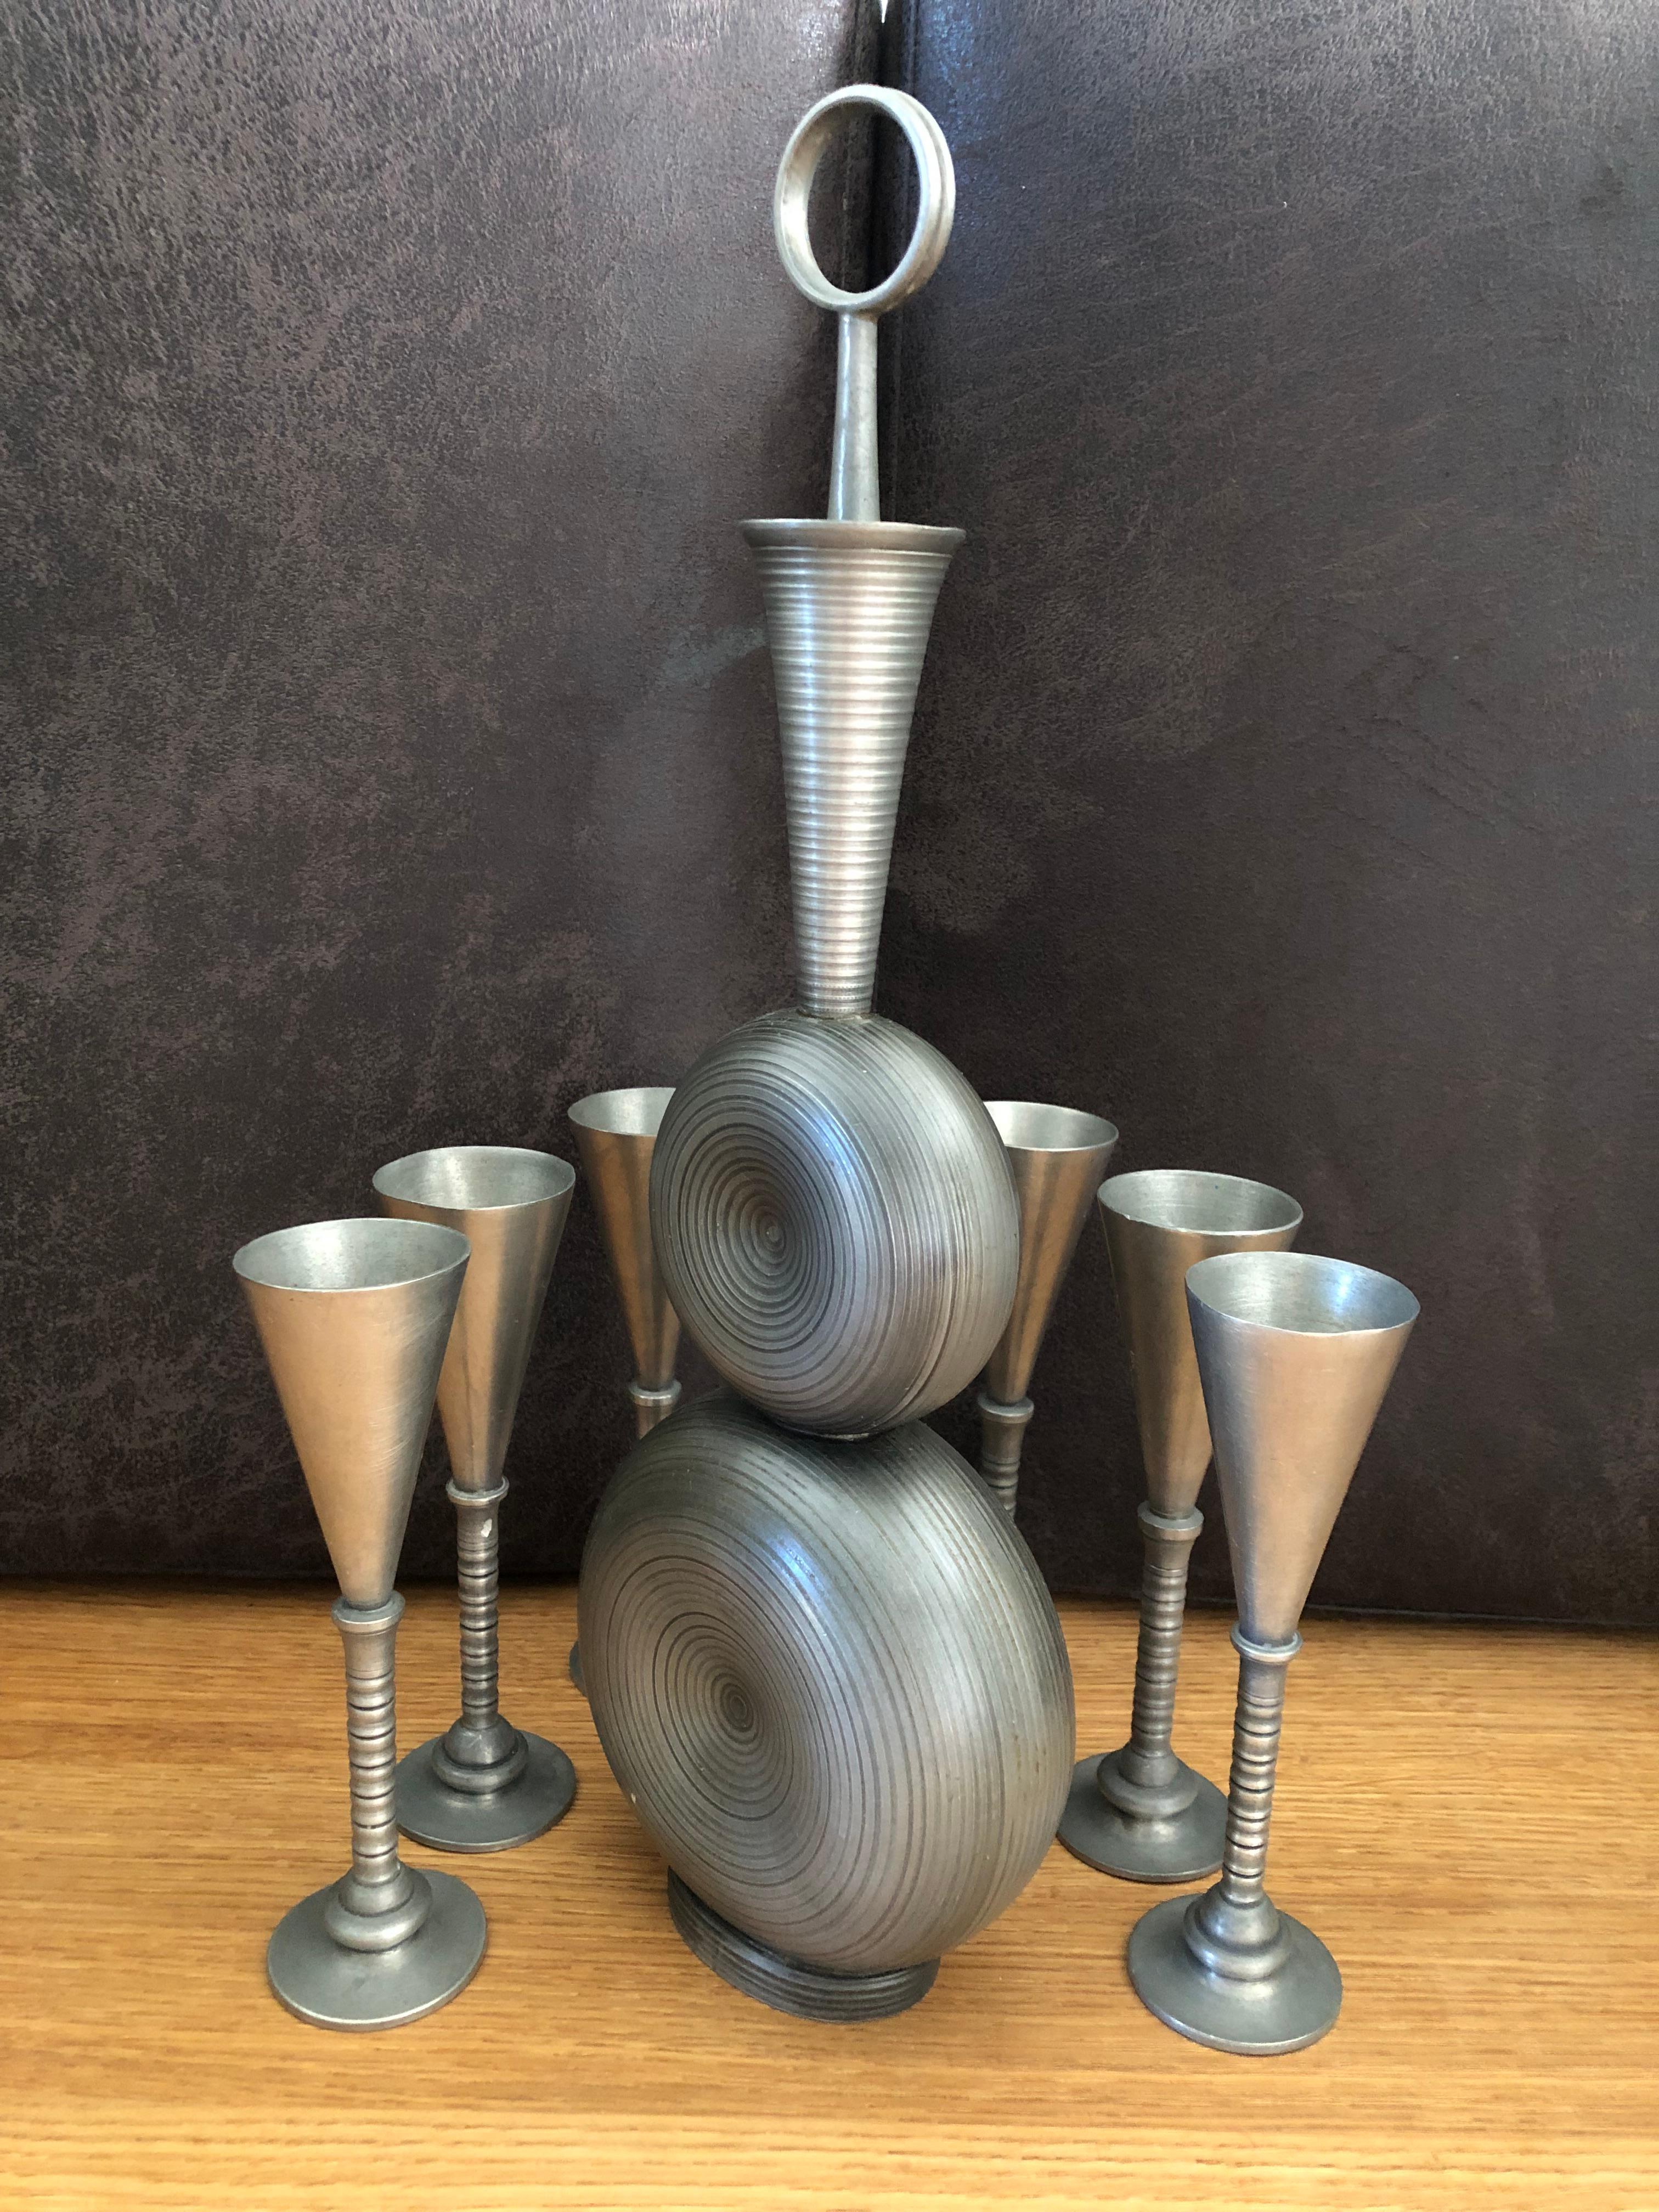 Great vintage Art Deco pewter decanter set by Gunnar Havstad Norway. Really beautiful styling on the decanter. Pieces are solid and have a nice weight. Set includes a decanter and six shot glasses. Please see photos carefully for details. Decanter